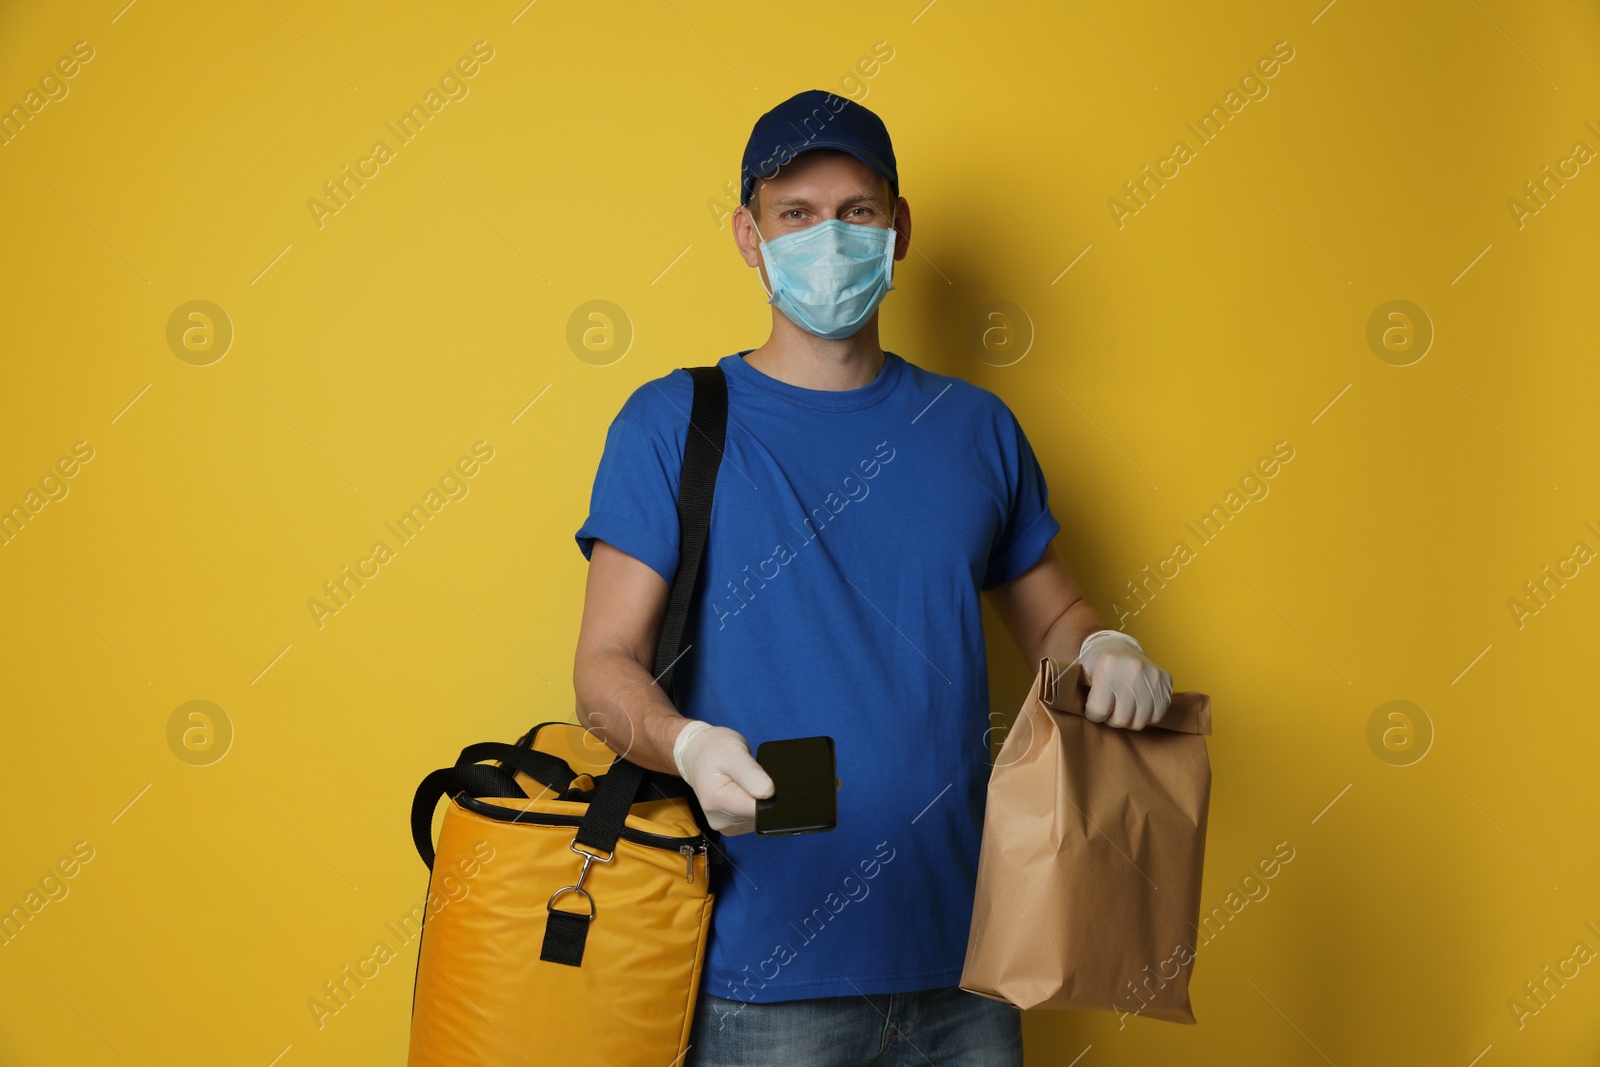 Photo of Courier in protective mask holding order and smartphone for contactless payment on yellow background. Food delivery service during coronavirus quarantine